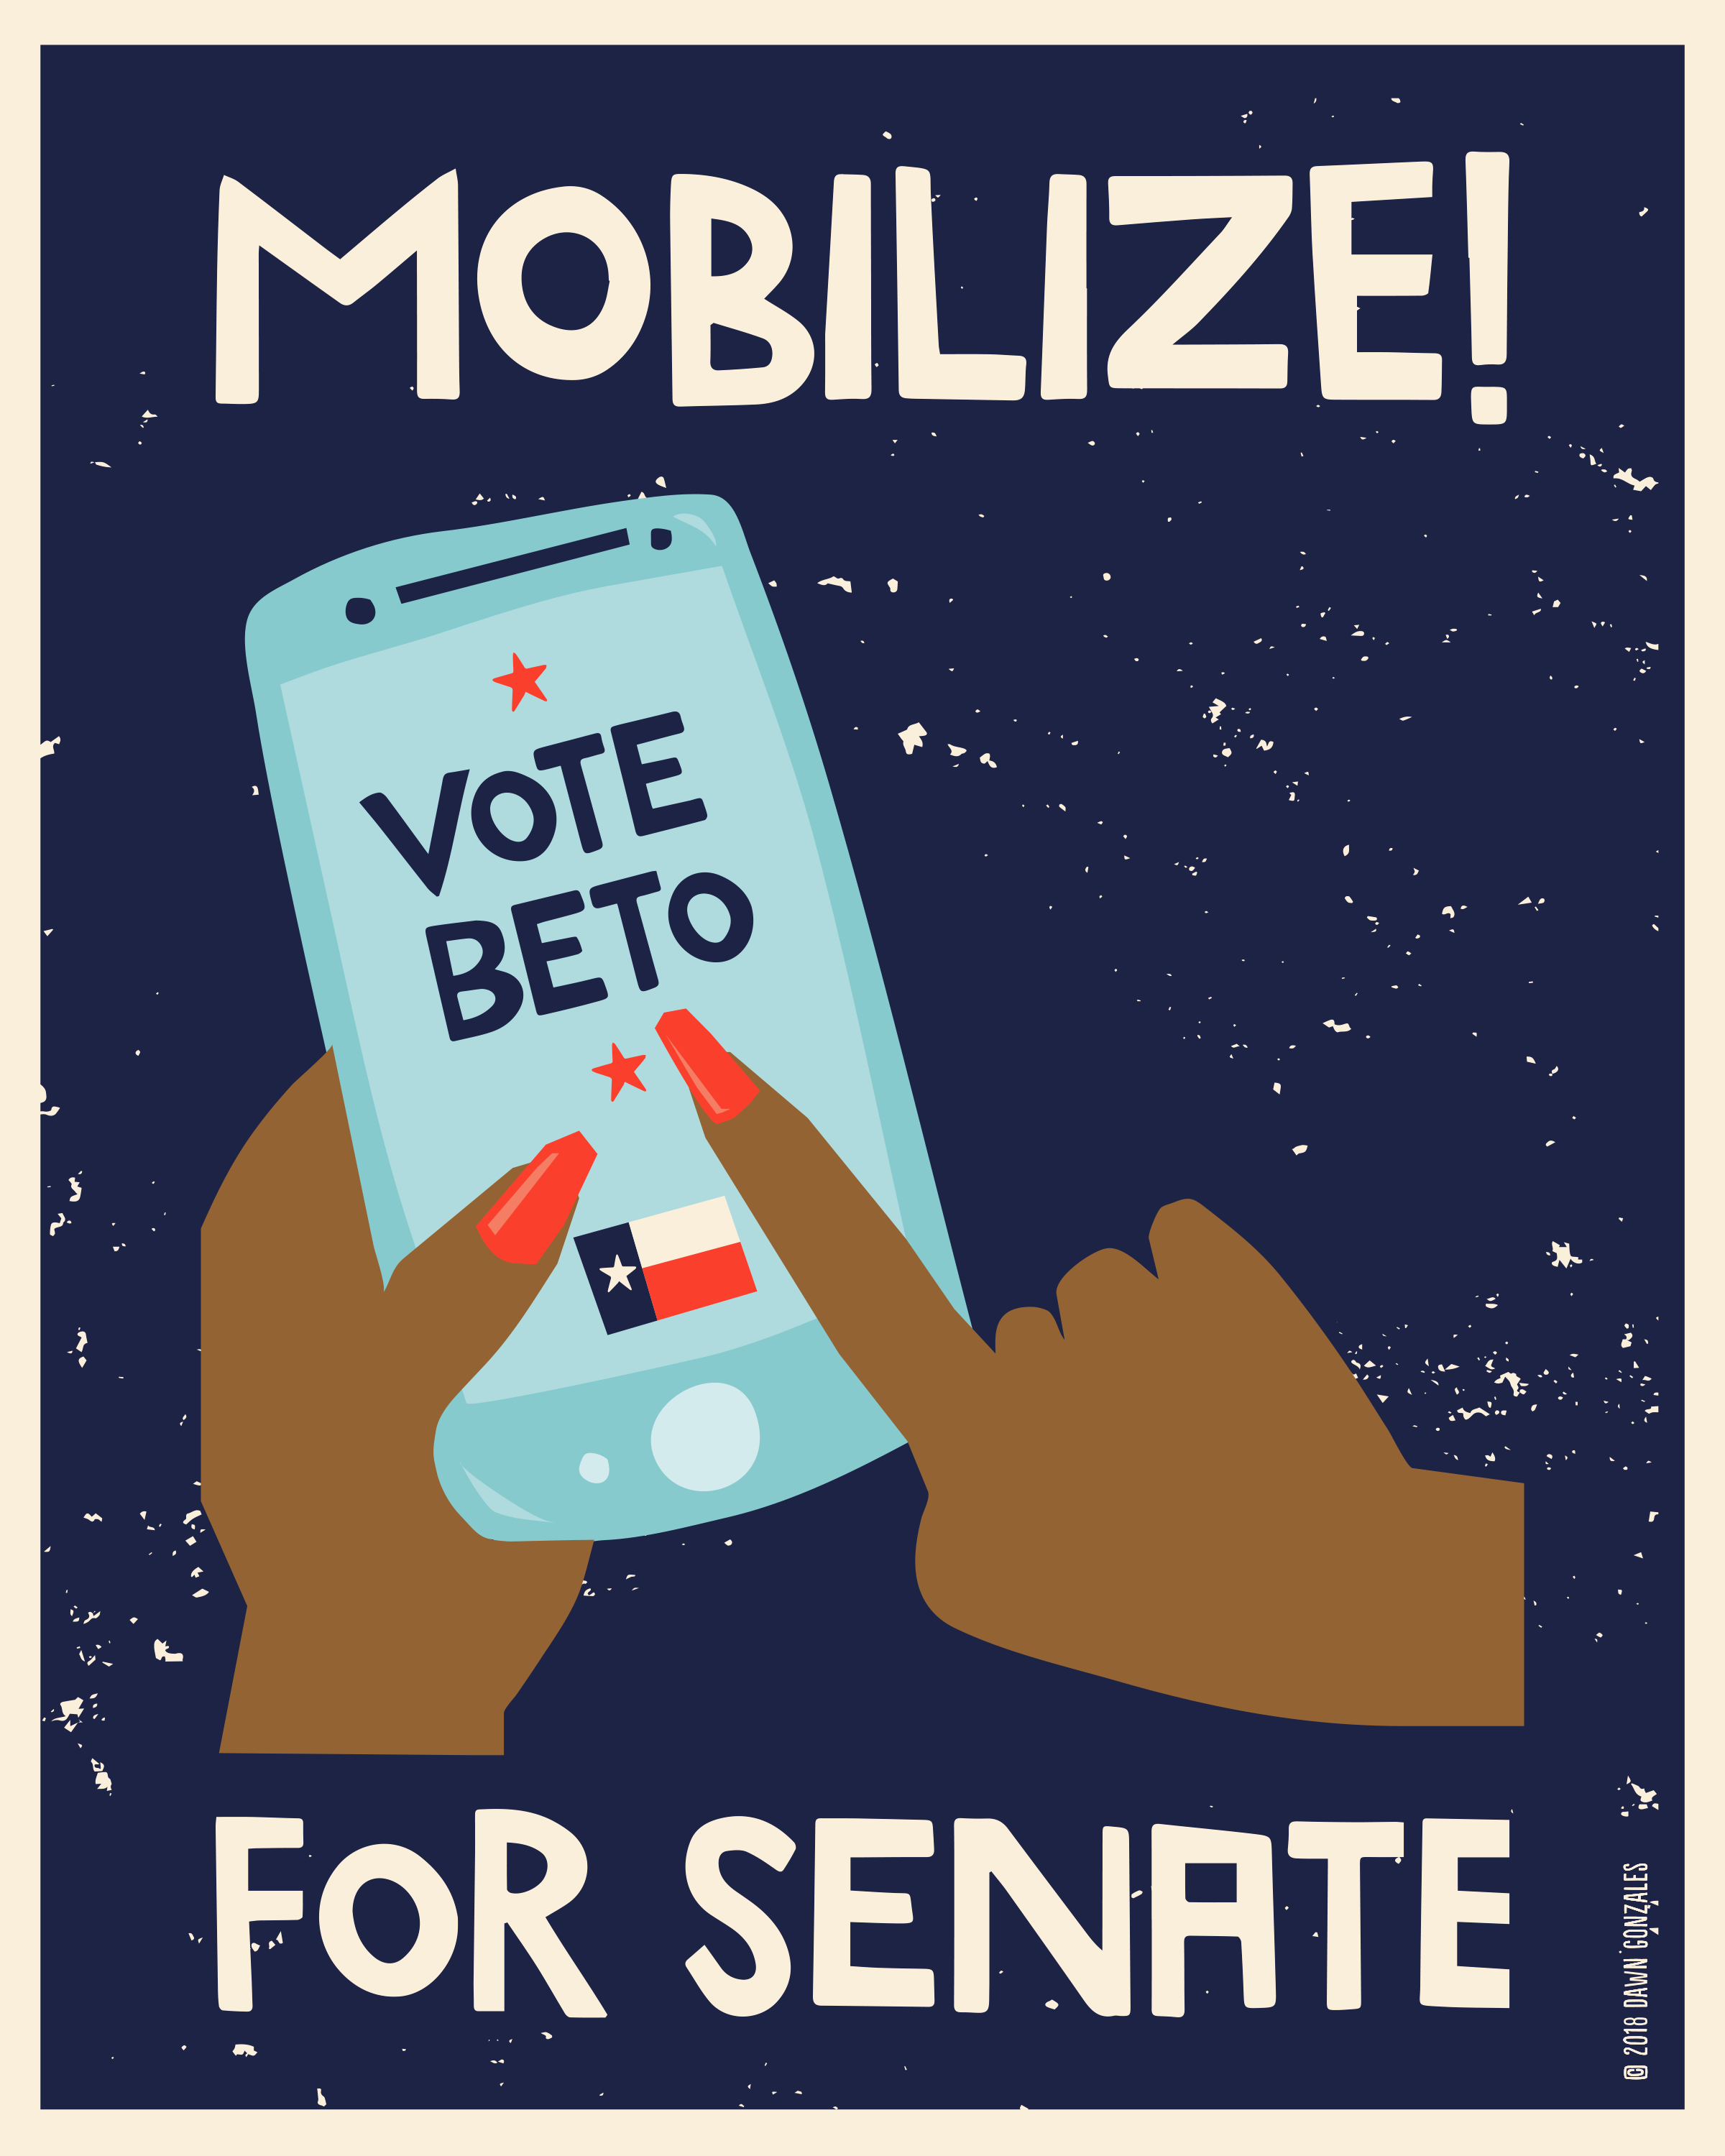 Mobilize for Beto (Millennial Edition), 2018